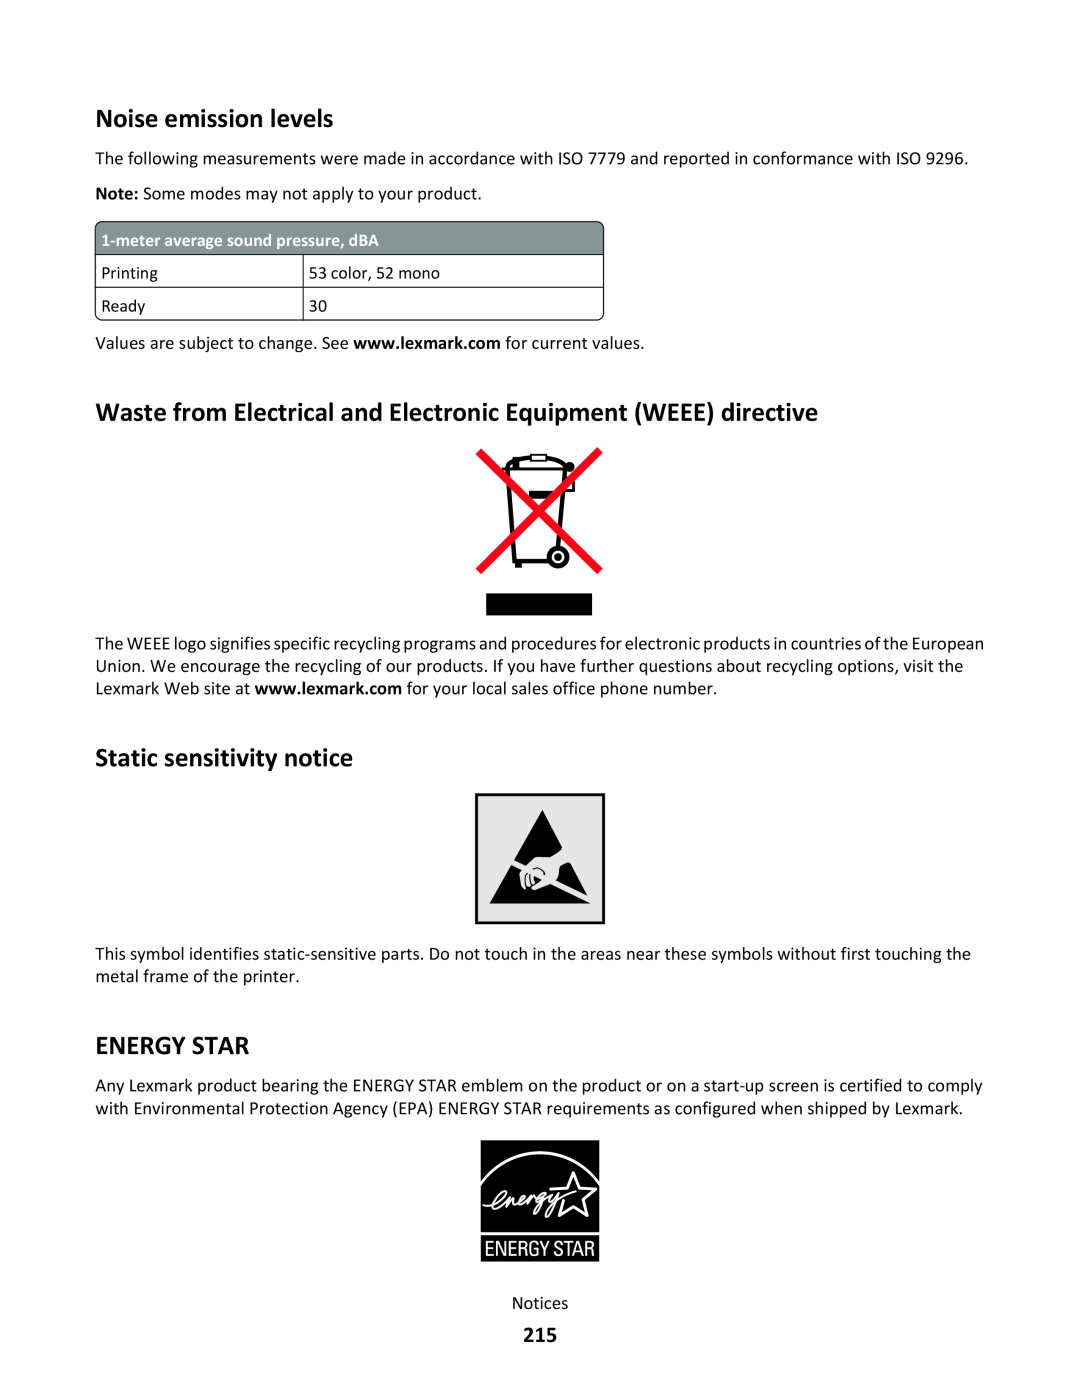 Lexmark C790 manual Noise emission levels, Waste from Electrical and Electronic Equipment WEEE directive, Energy Star 